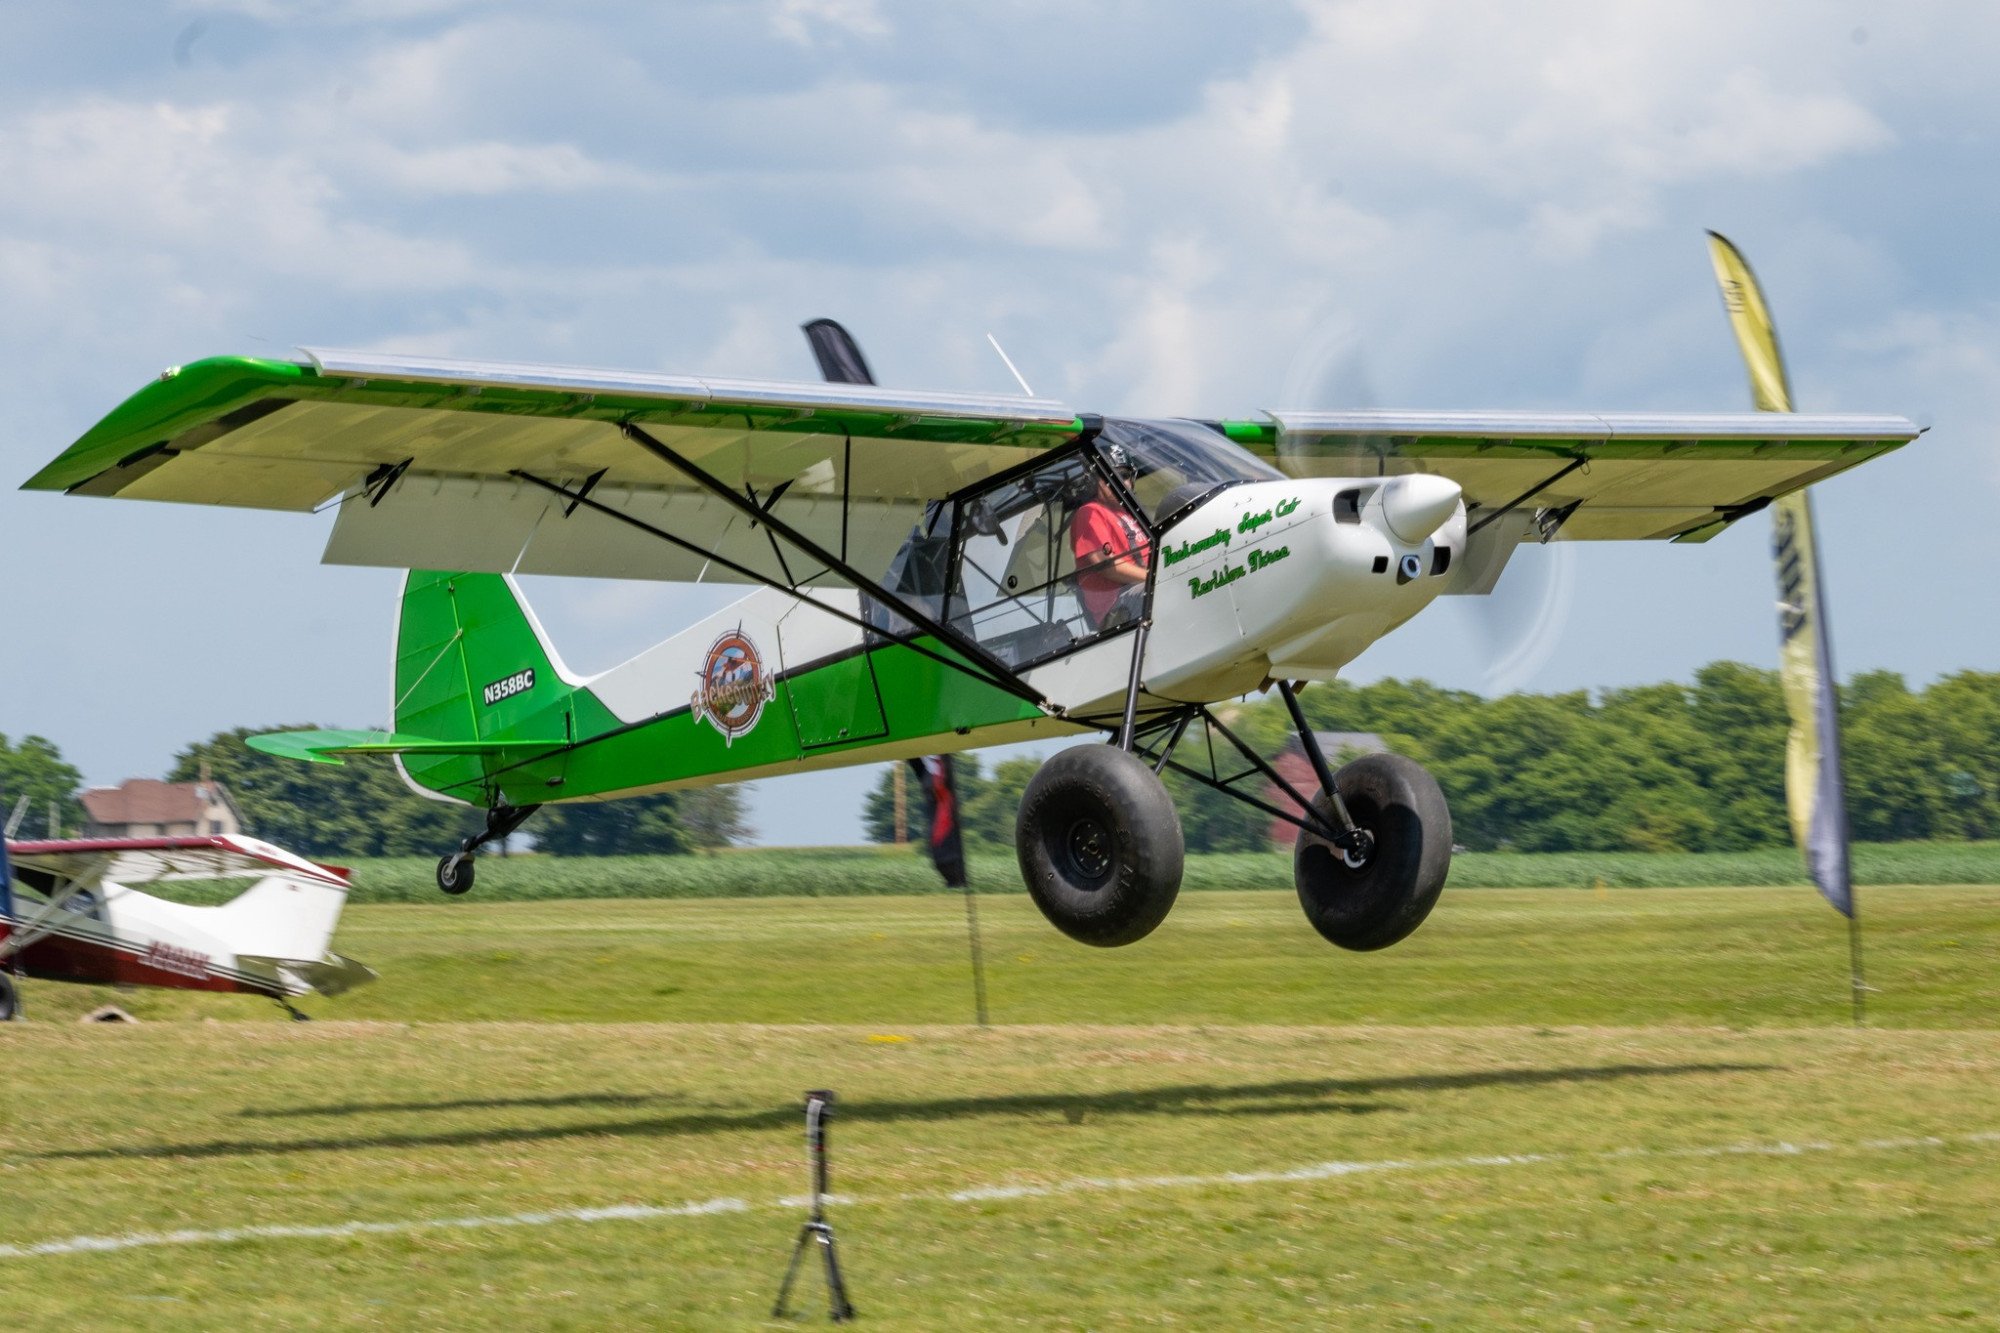 Kyle Bushman flying the Backcountry Super Cub Rev III at the National STOL Series 2022 Sodbusters STOL Competition. Photo Credit: National STOL